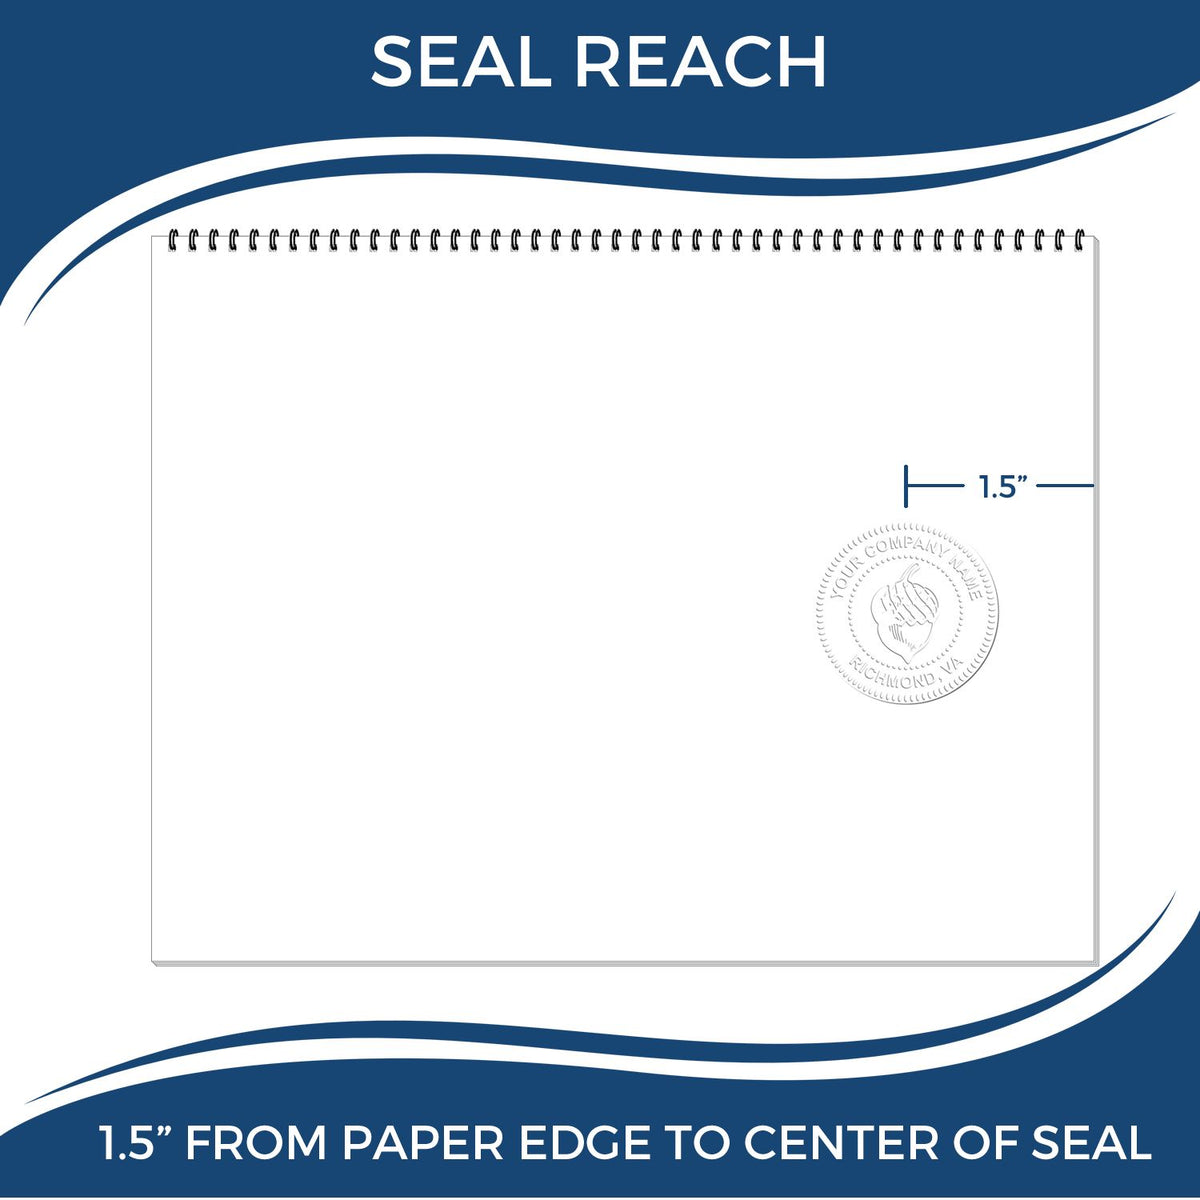 An infographic showing the seal reach which is represented by a ruler and a miniature seal image of the Hybrid South Dakota Landscape Architect Seal